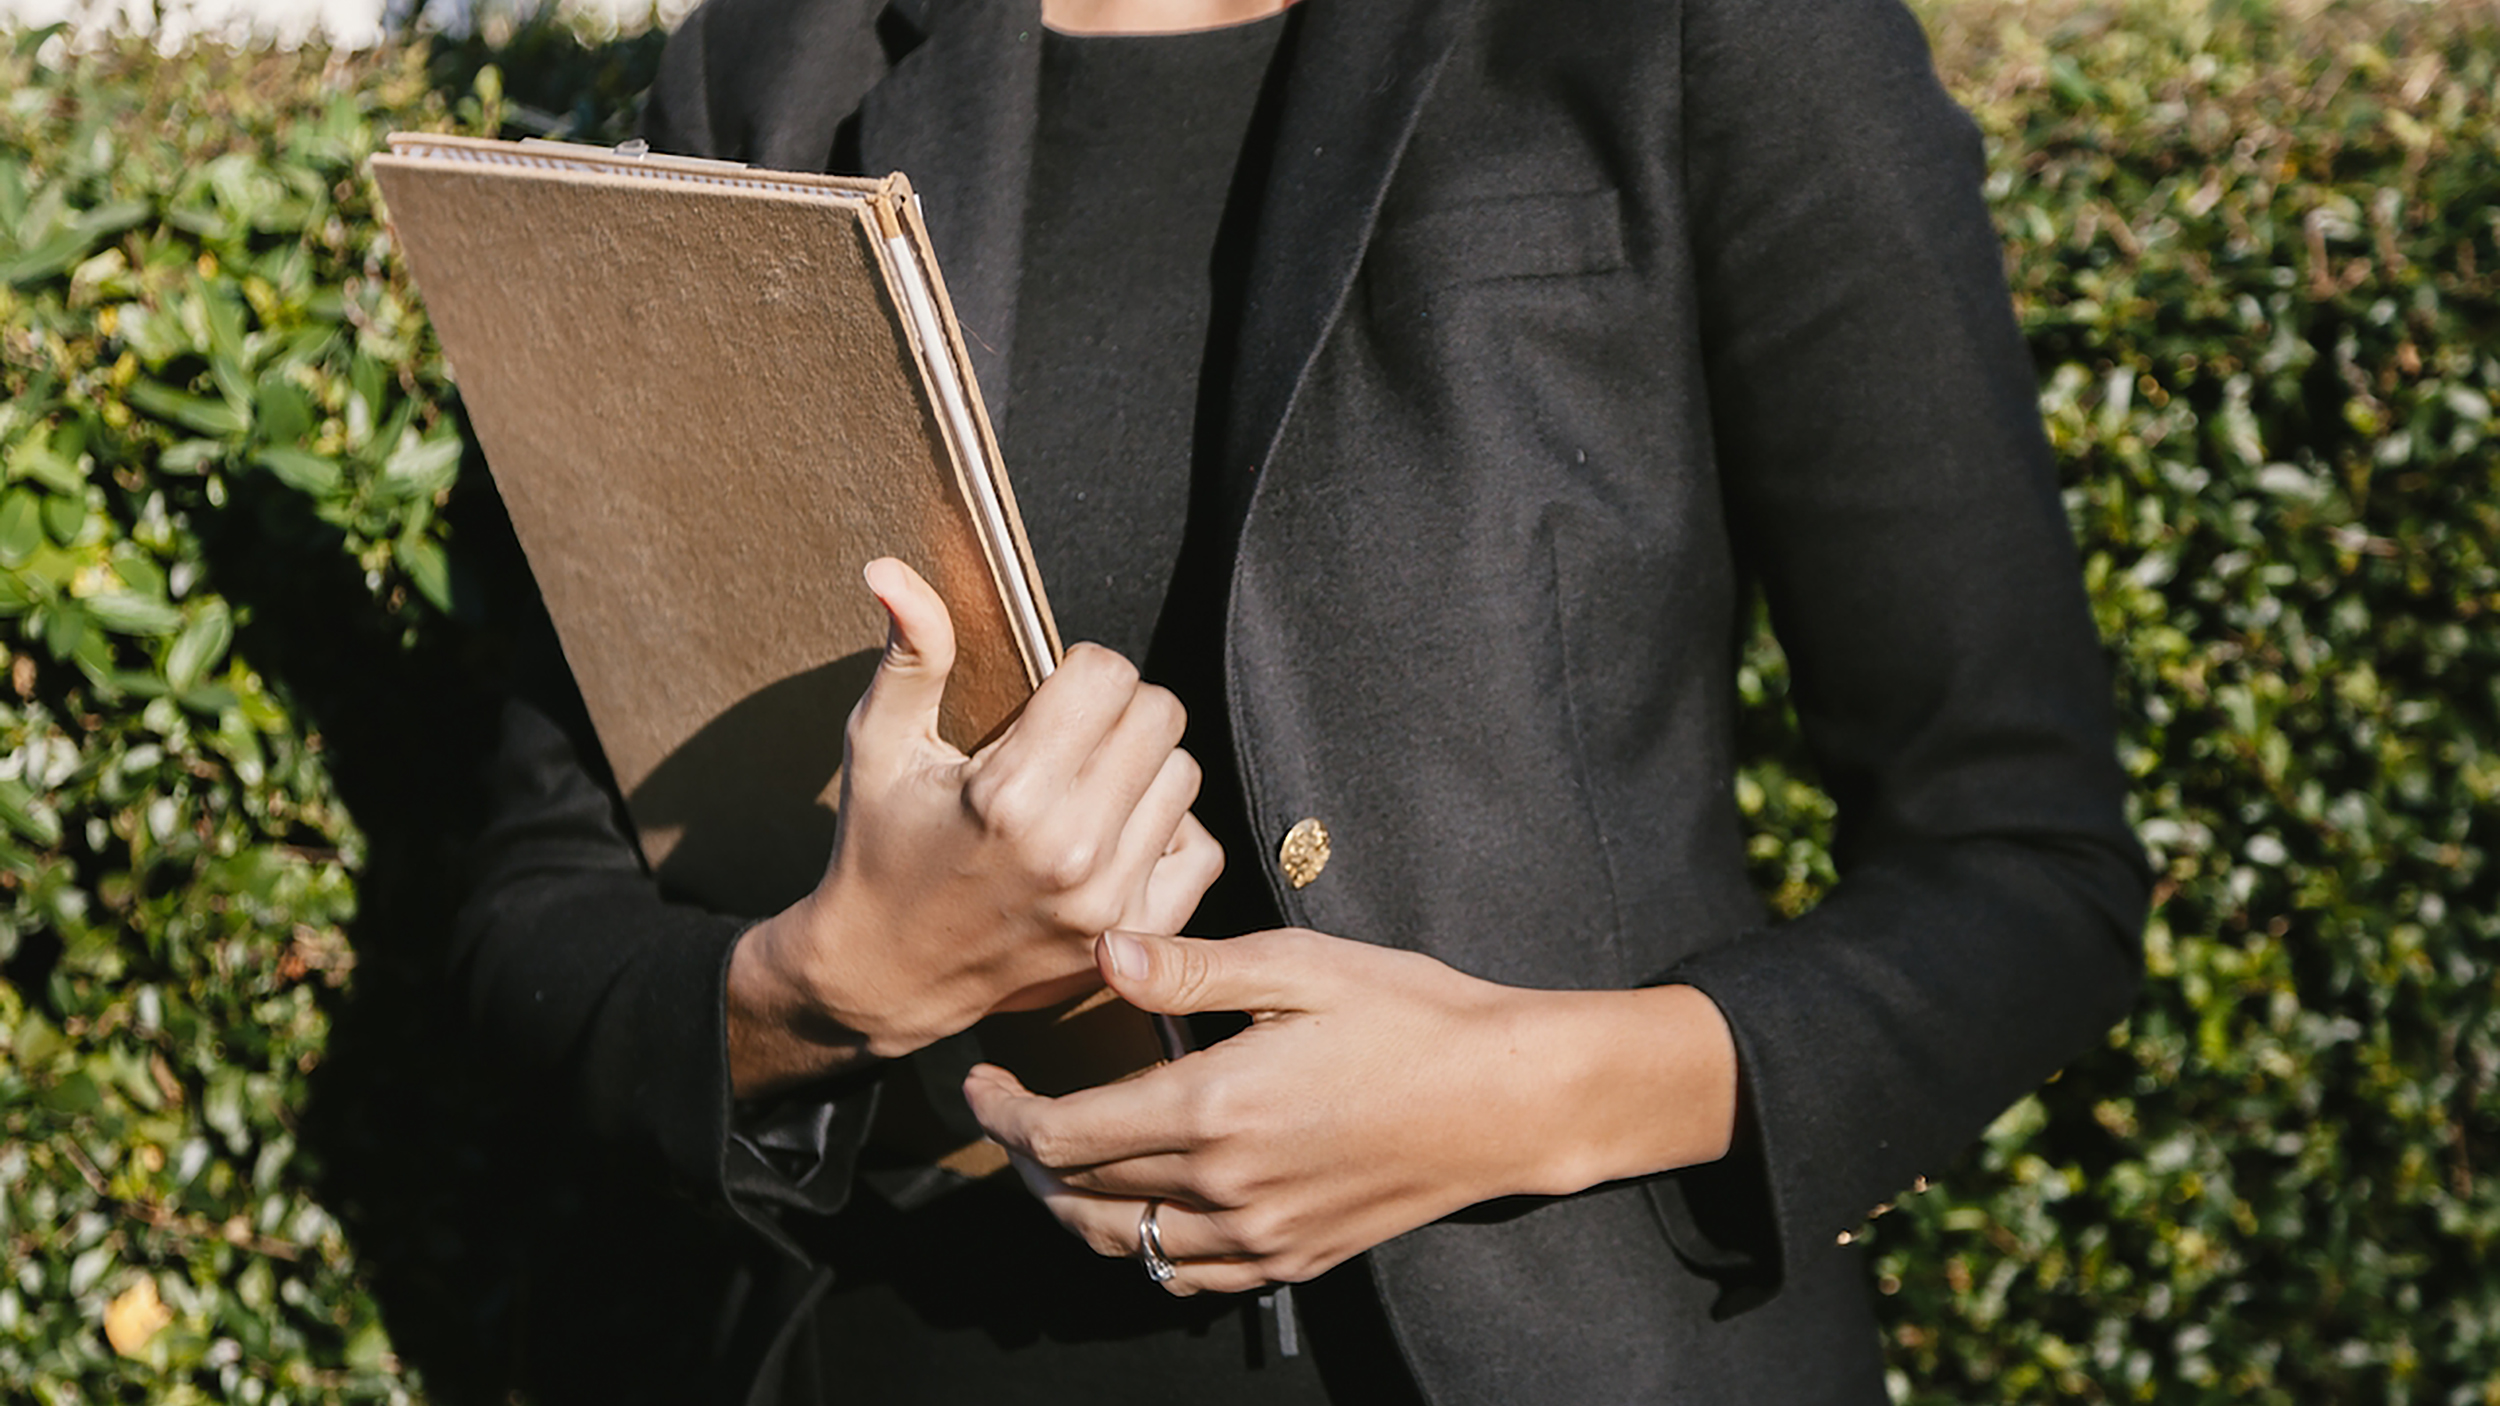 A woman in a business suit exemplifying leadership in the 2020s, confidently holding a folder.